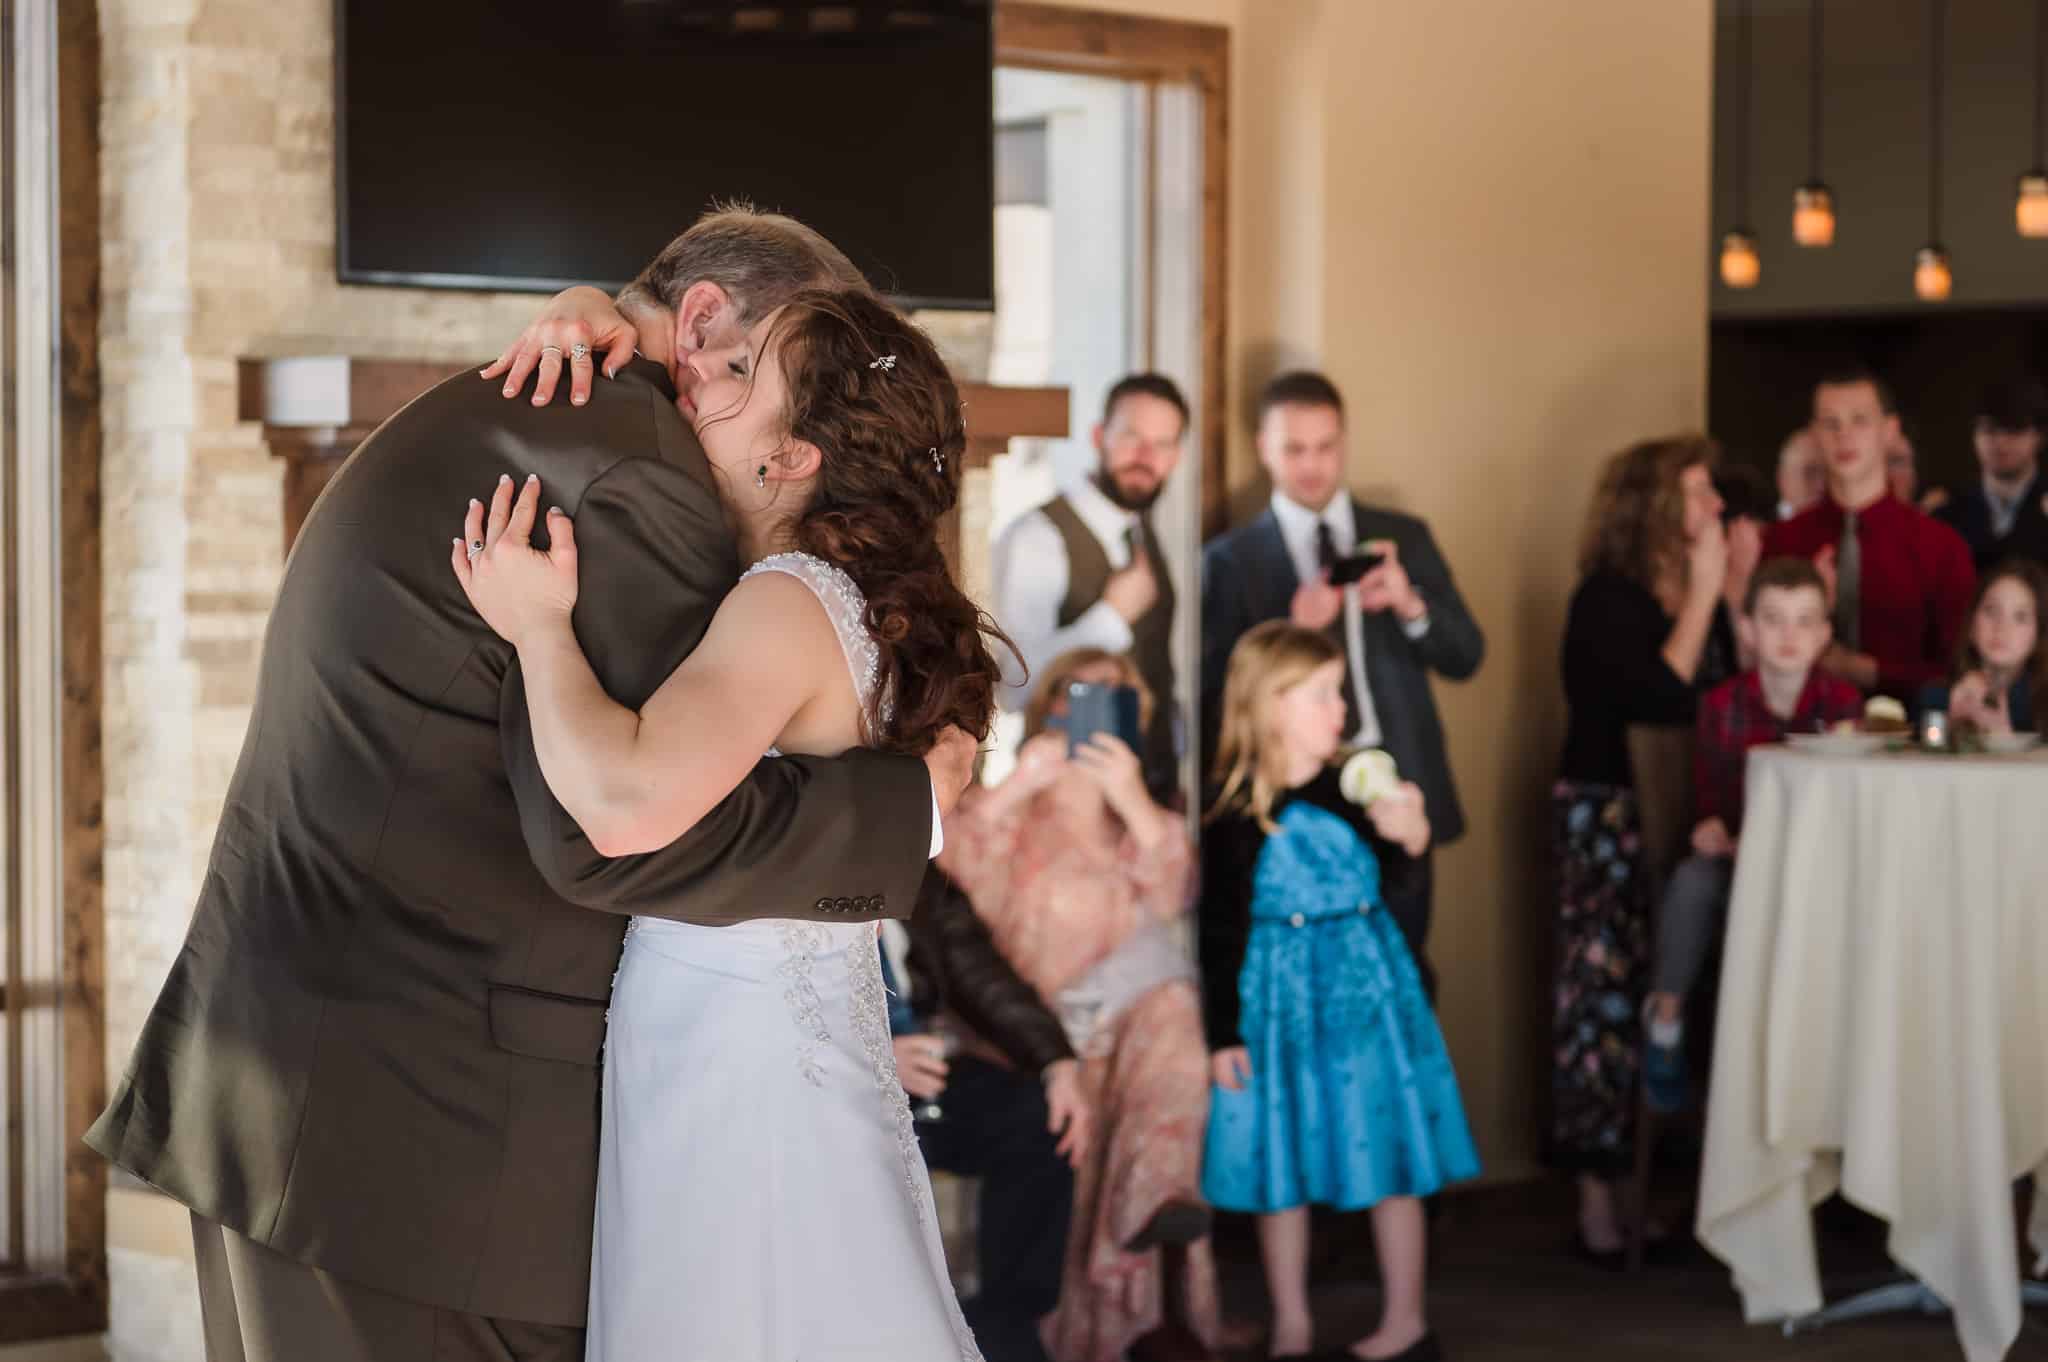 The bride gives her father an emotional hug as the crowd looks on following their daddy daughter dance